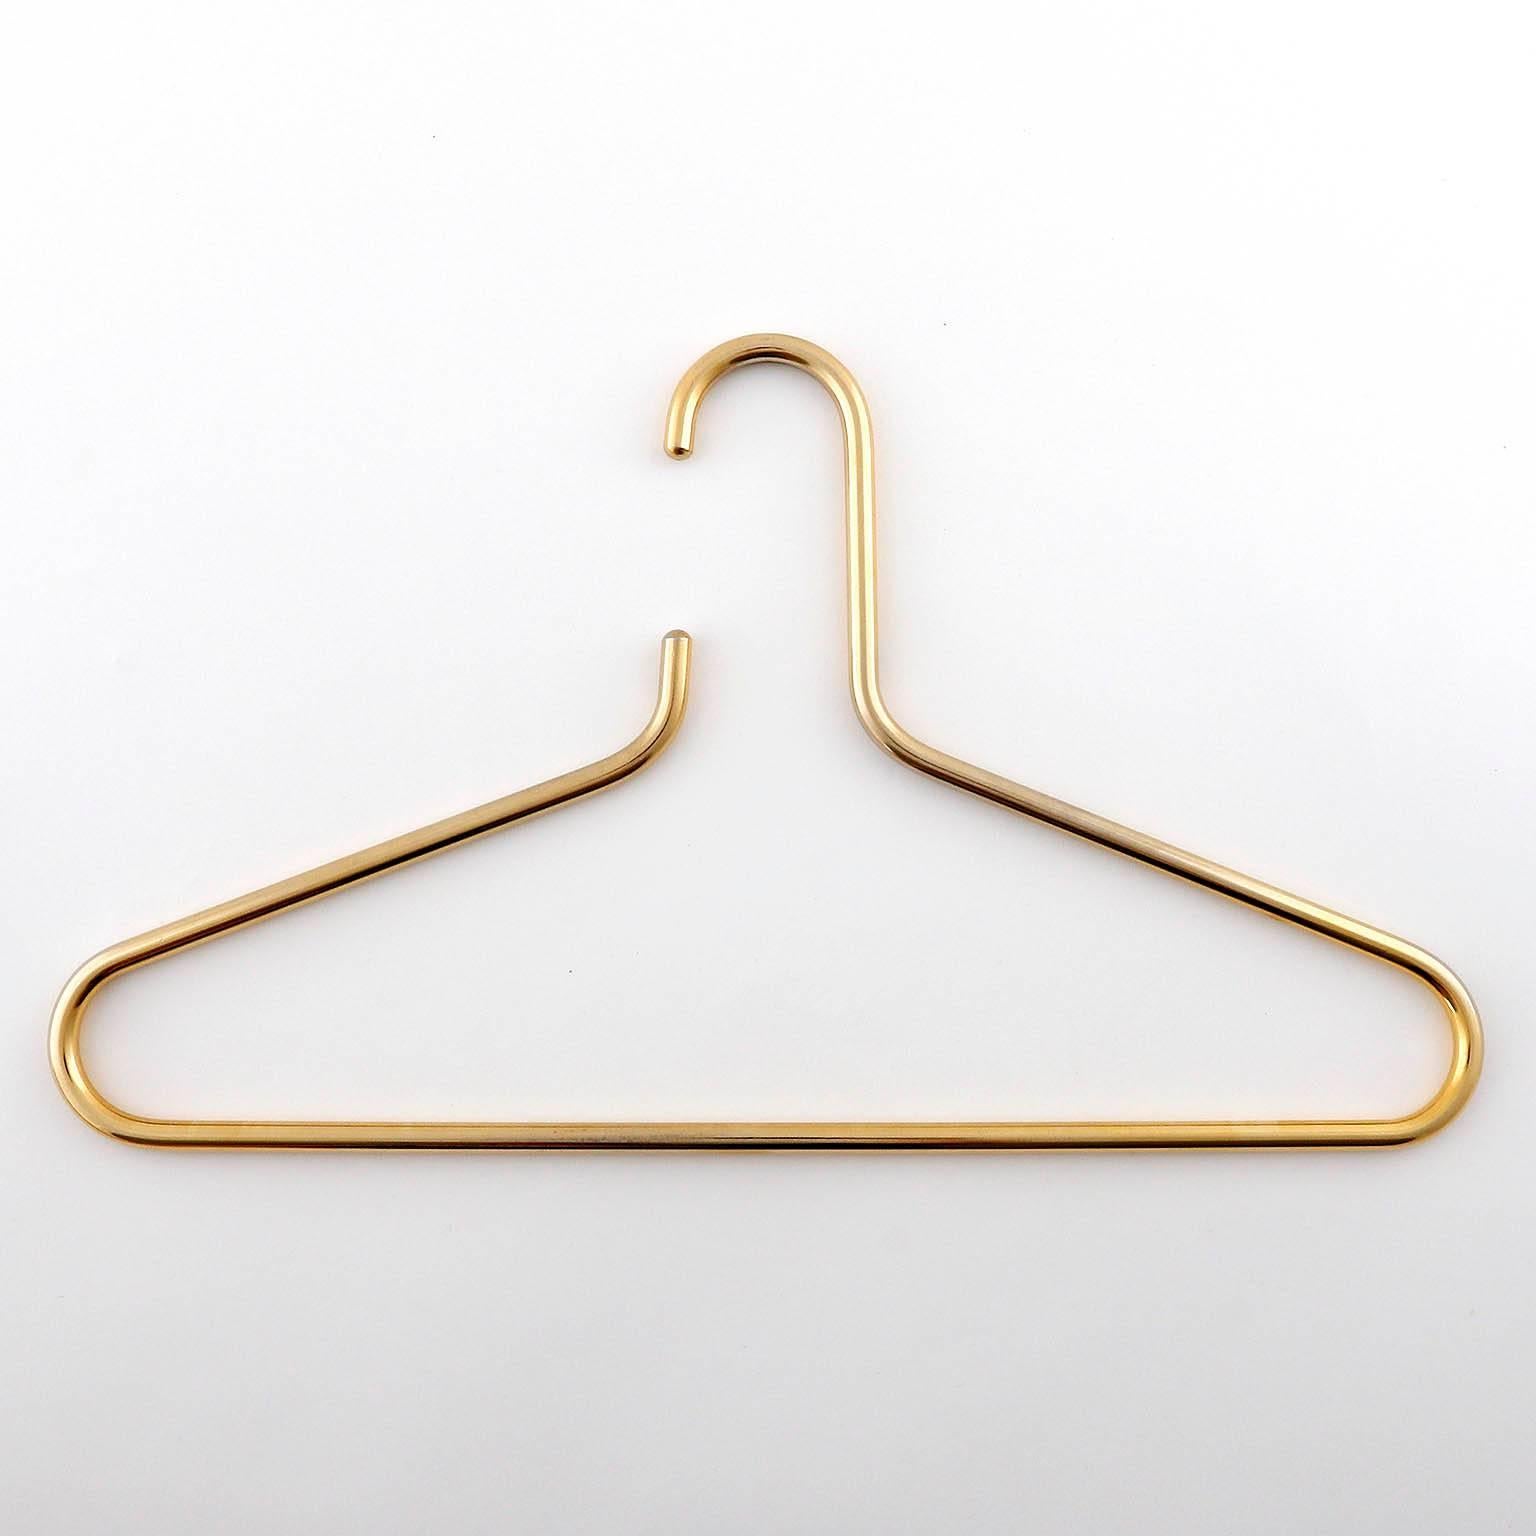 A set of ten coat hangers manufactured in Mid-Century (1960s-1970s). A simple and timeless design. Very solid craftsmanship.

The price is per hanger. The hangers will be sold singly, as pair or as set of three, four, five, six, seven, eight, nine